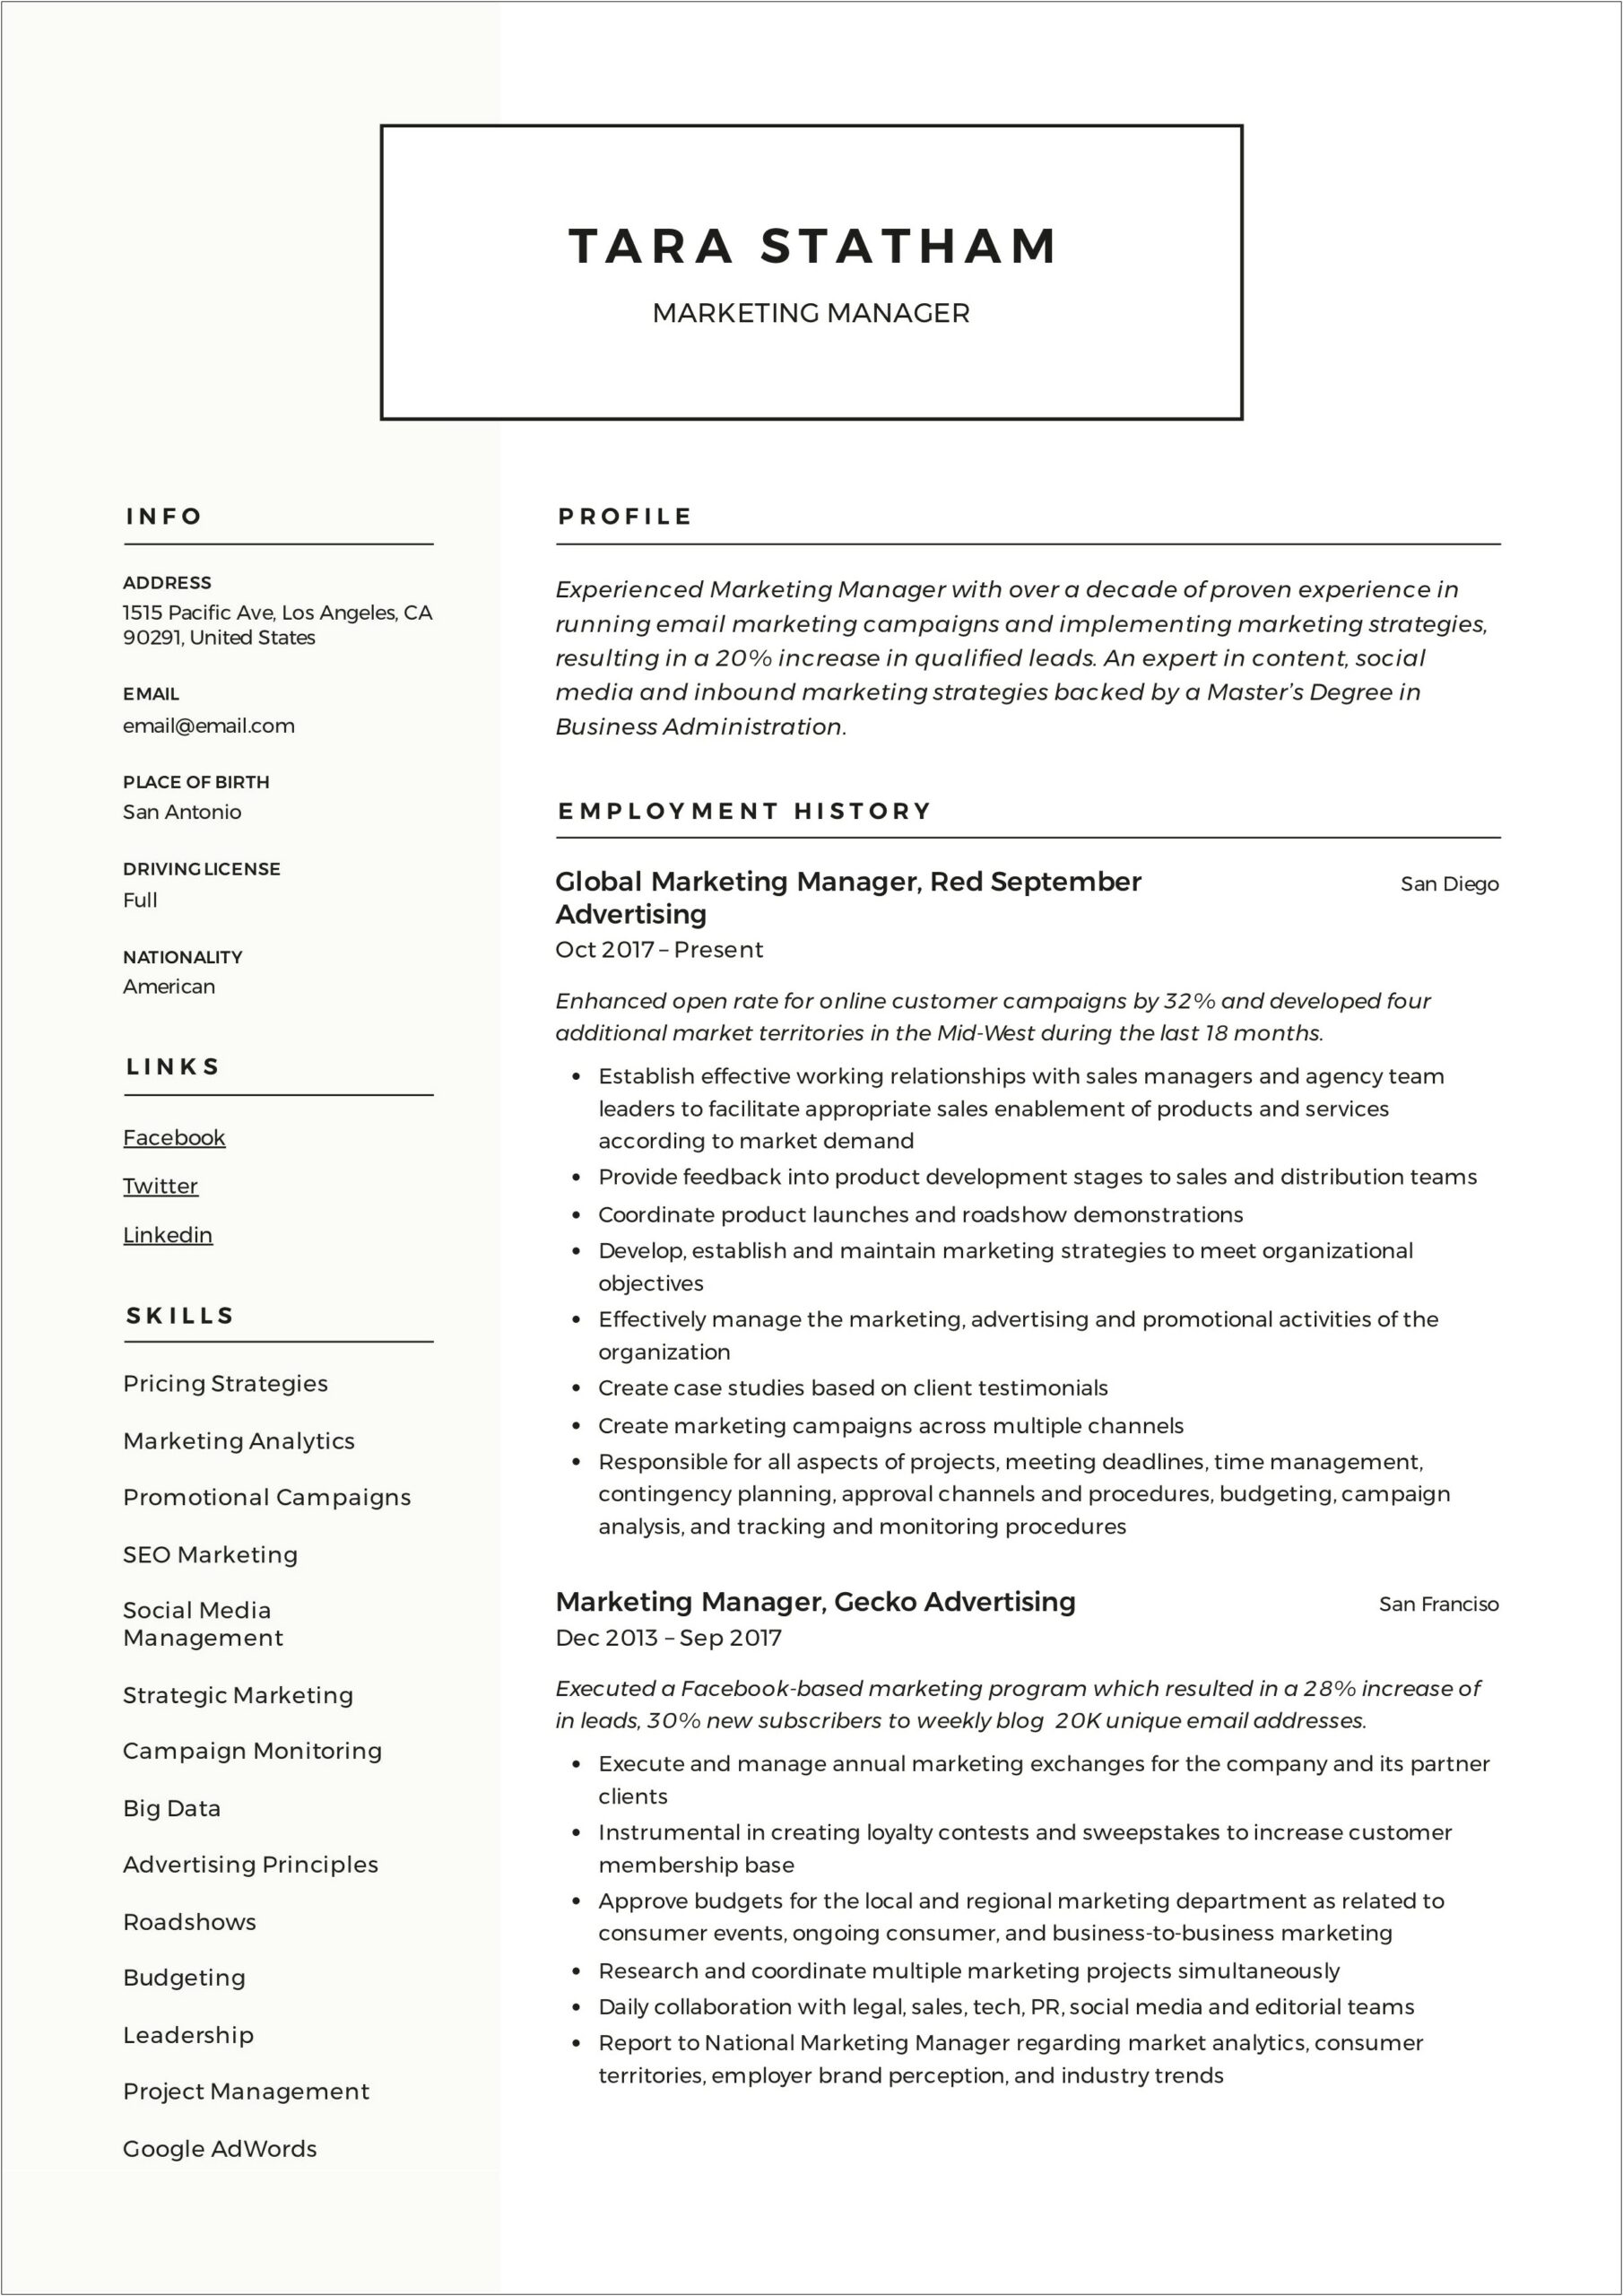 Resume Format For Area Sales Manager In Fmcg